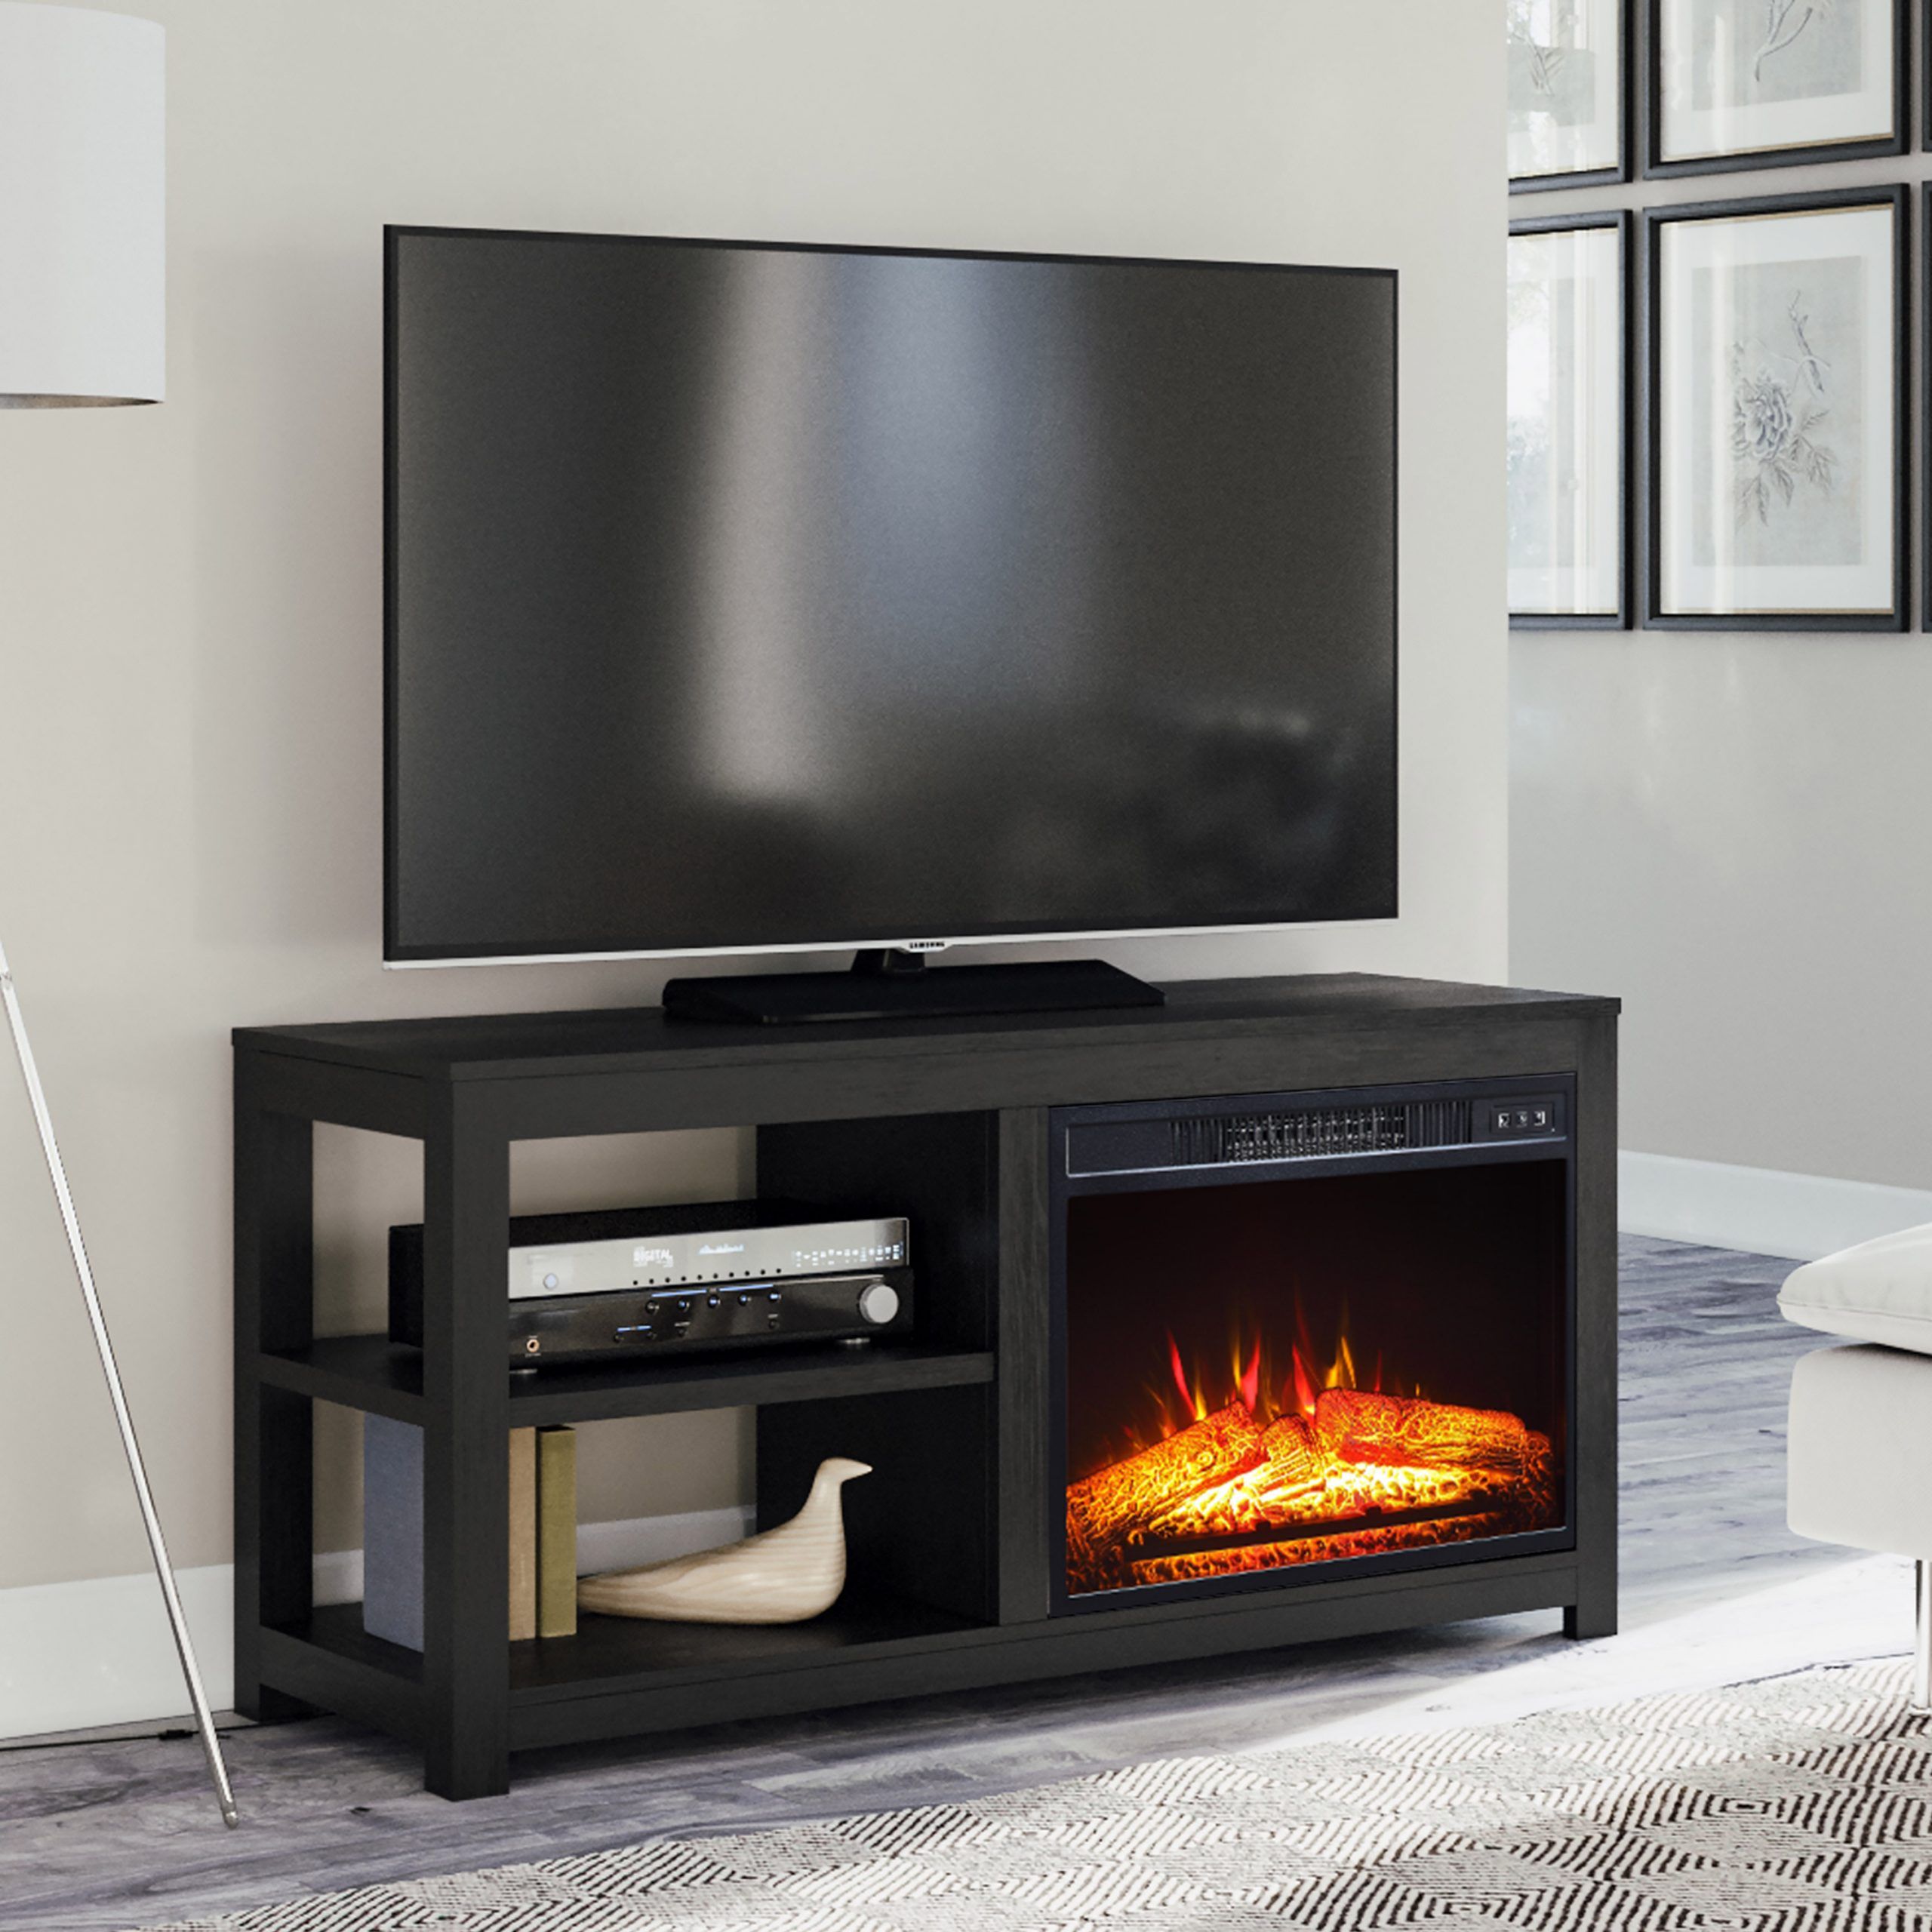 Mainstays 2 Shelf Media Fireplace Tv Stand For Flat Panel Throughout Margulies Tv Stands For Tvs Up To 60" (View 1 of 15)